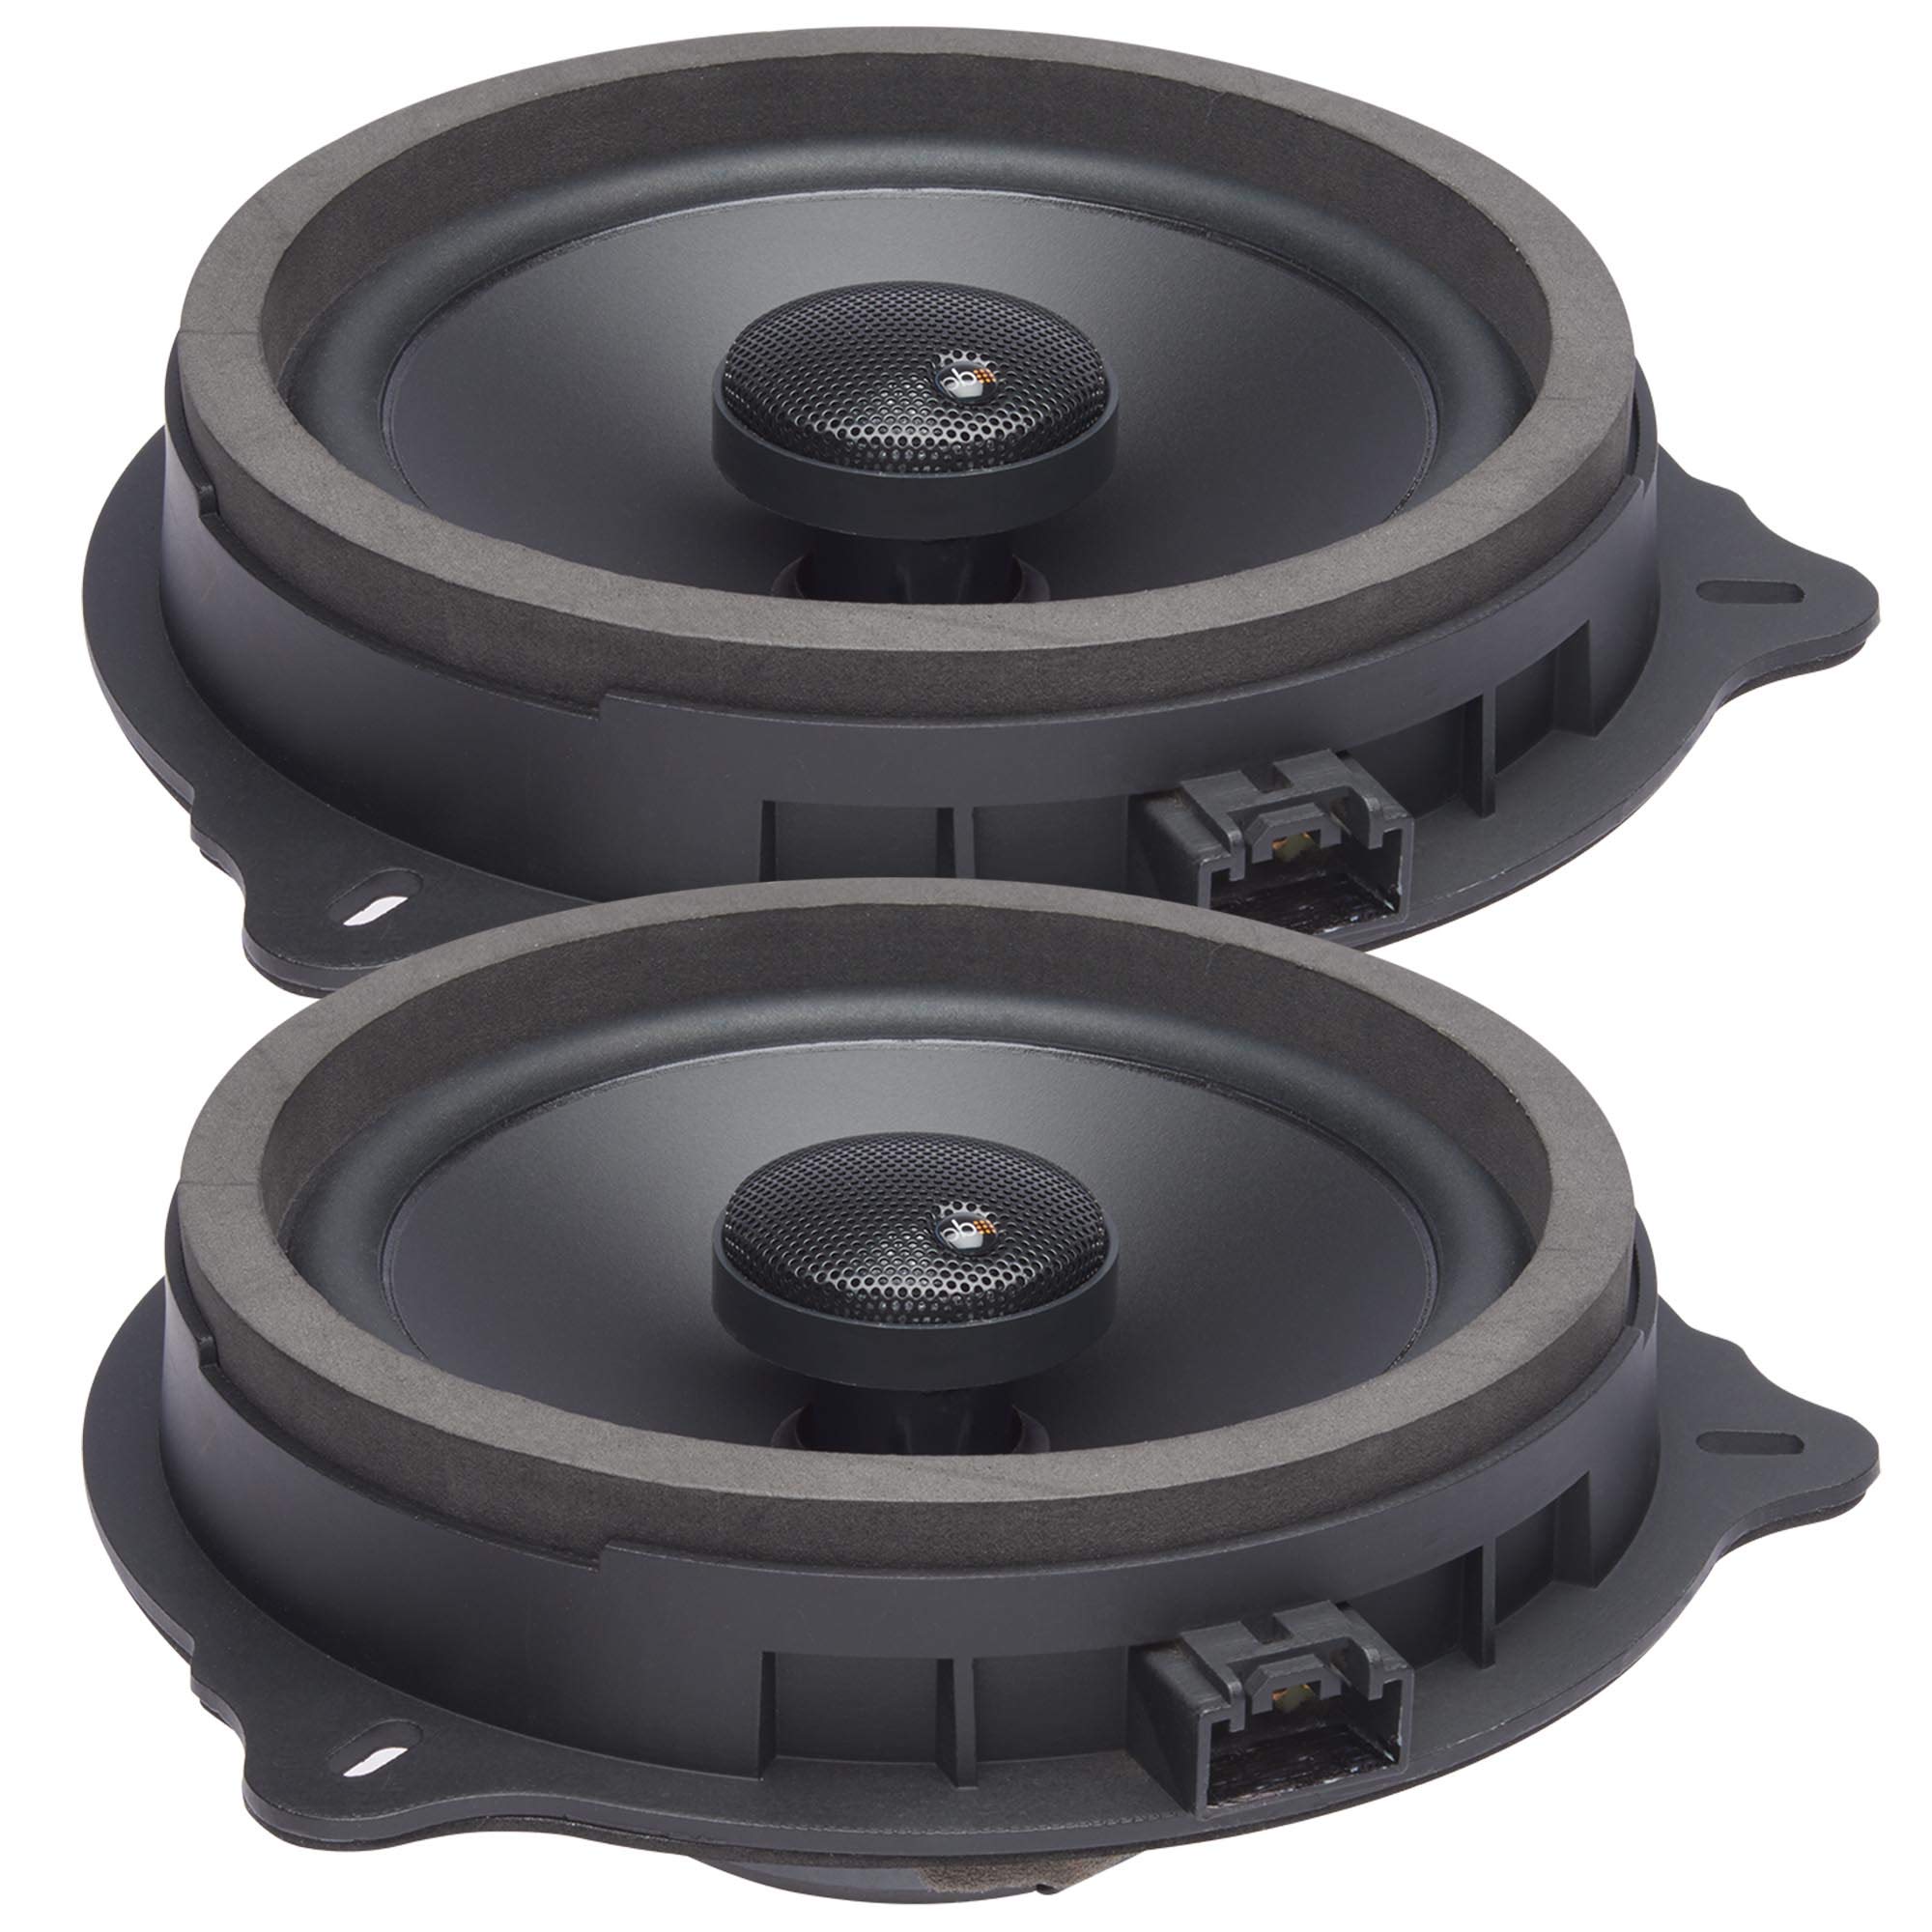 PowerBass OE652-FD - 6.5" Ford OEM Replacement Coaxial Speakers - Pair